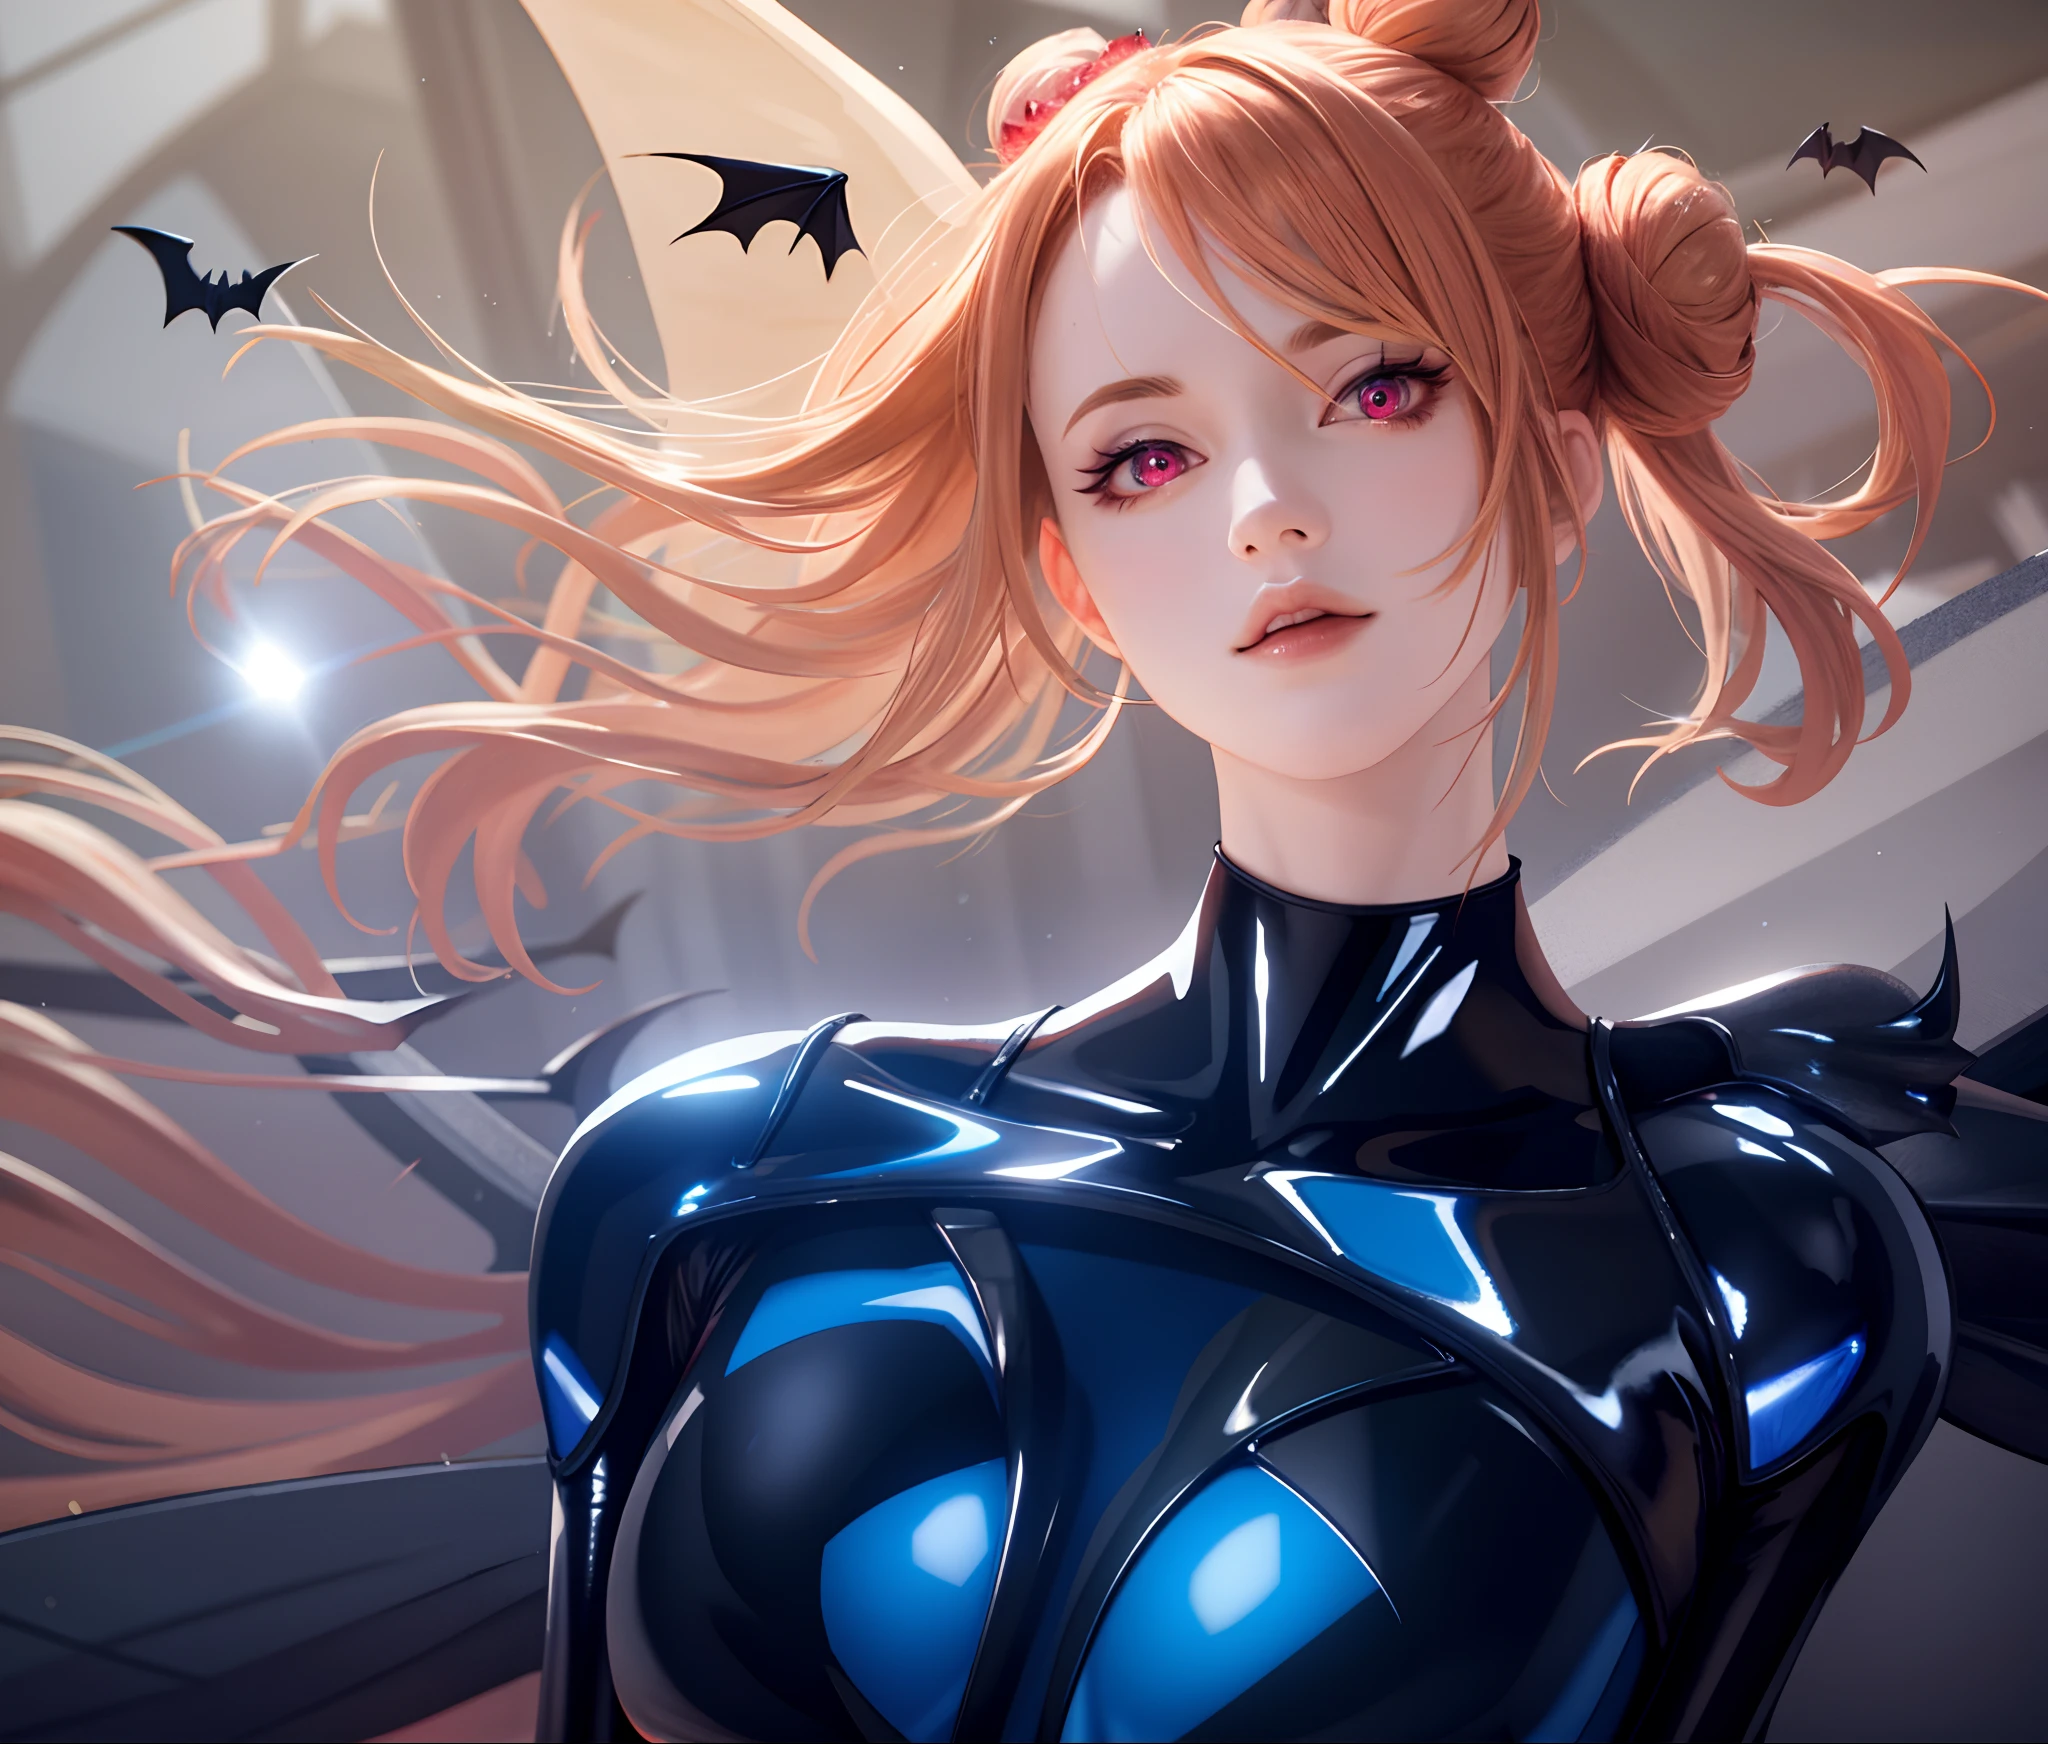 masterpiece, best quality, high quality, High definition, High quality texture, High quality shadow, high detail, realistic, Cinematic Light, sidelighting, Lens Flare, Ray tracing, sharp focus, bat wings, glowing wings, strawberry blonde hair, hair bun, red eyes, bodysuit, bats, floating, legs crossed, blue bodysuit,